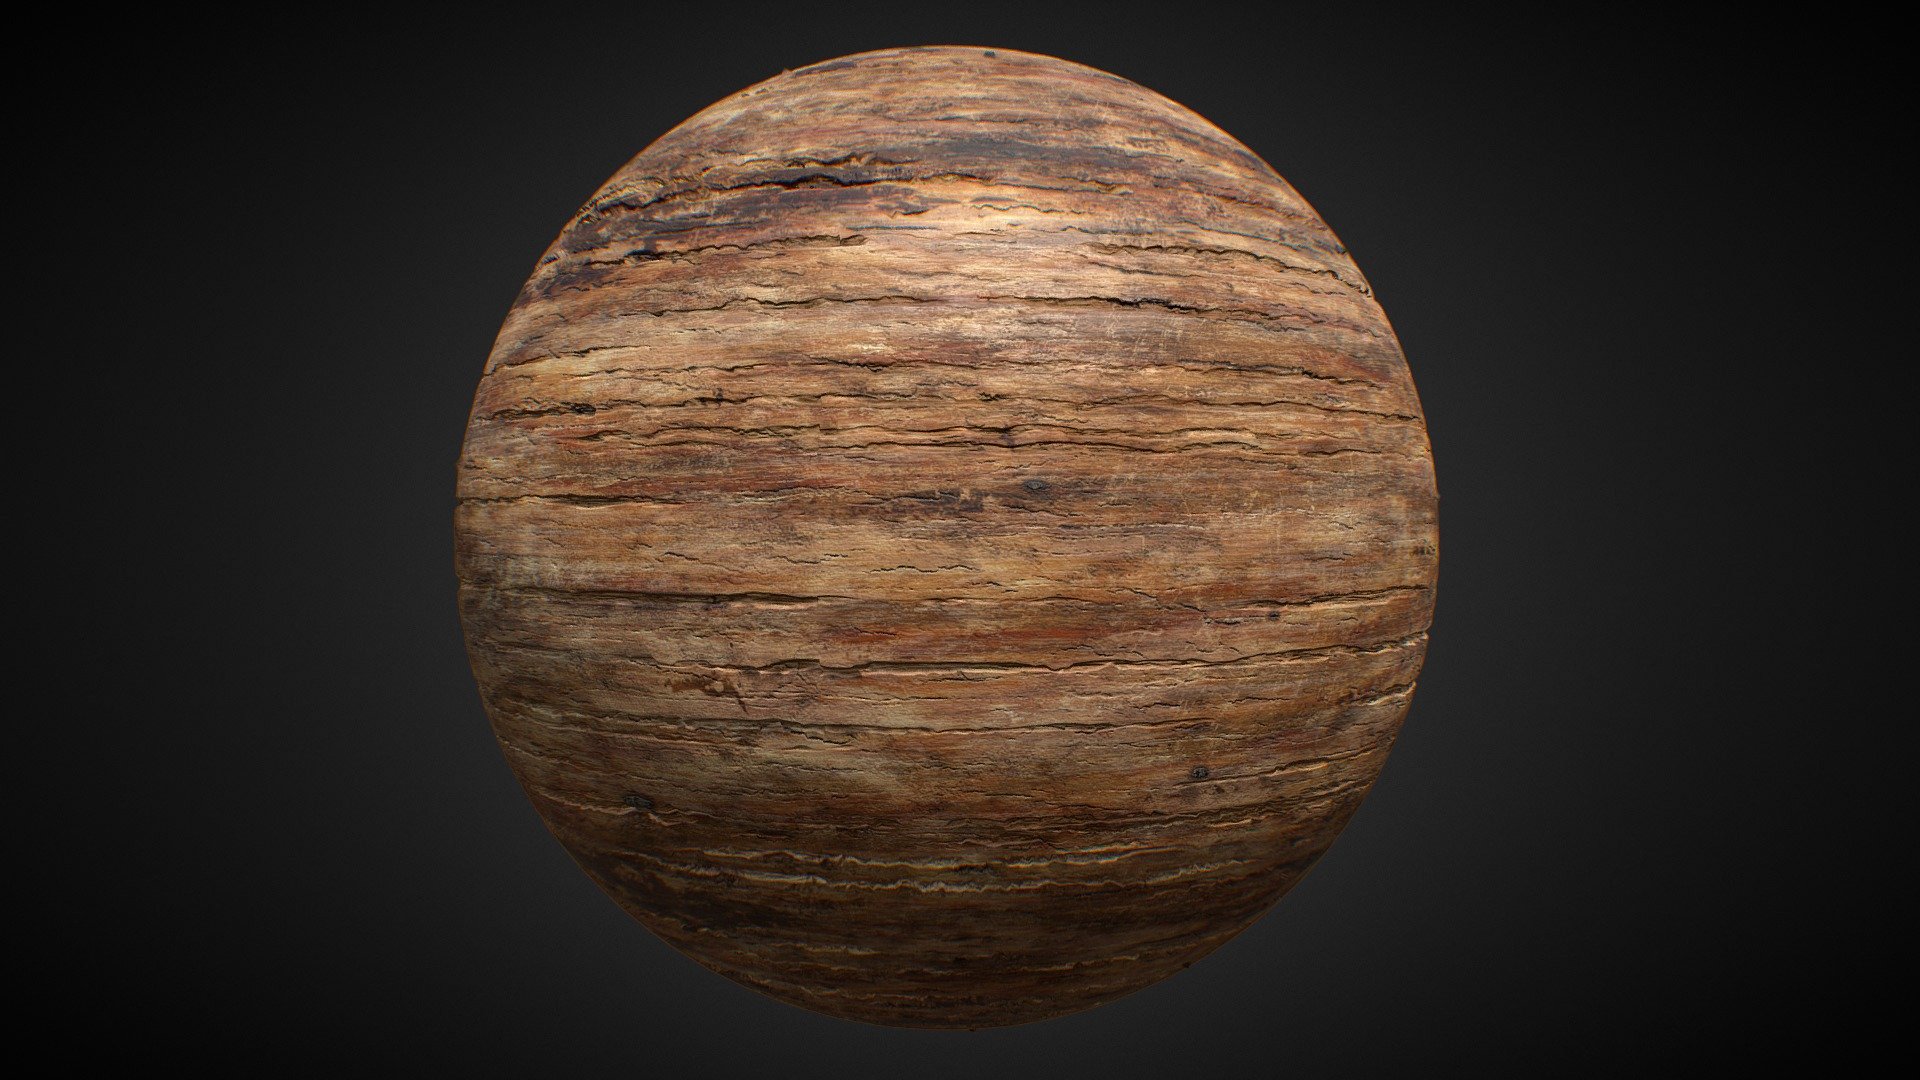 Just a tiling generic wood material I made based on some old western structures I looked up 3d model